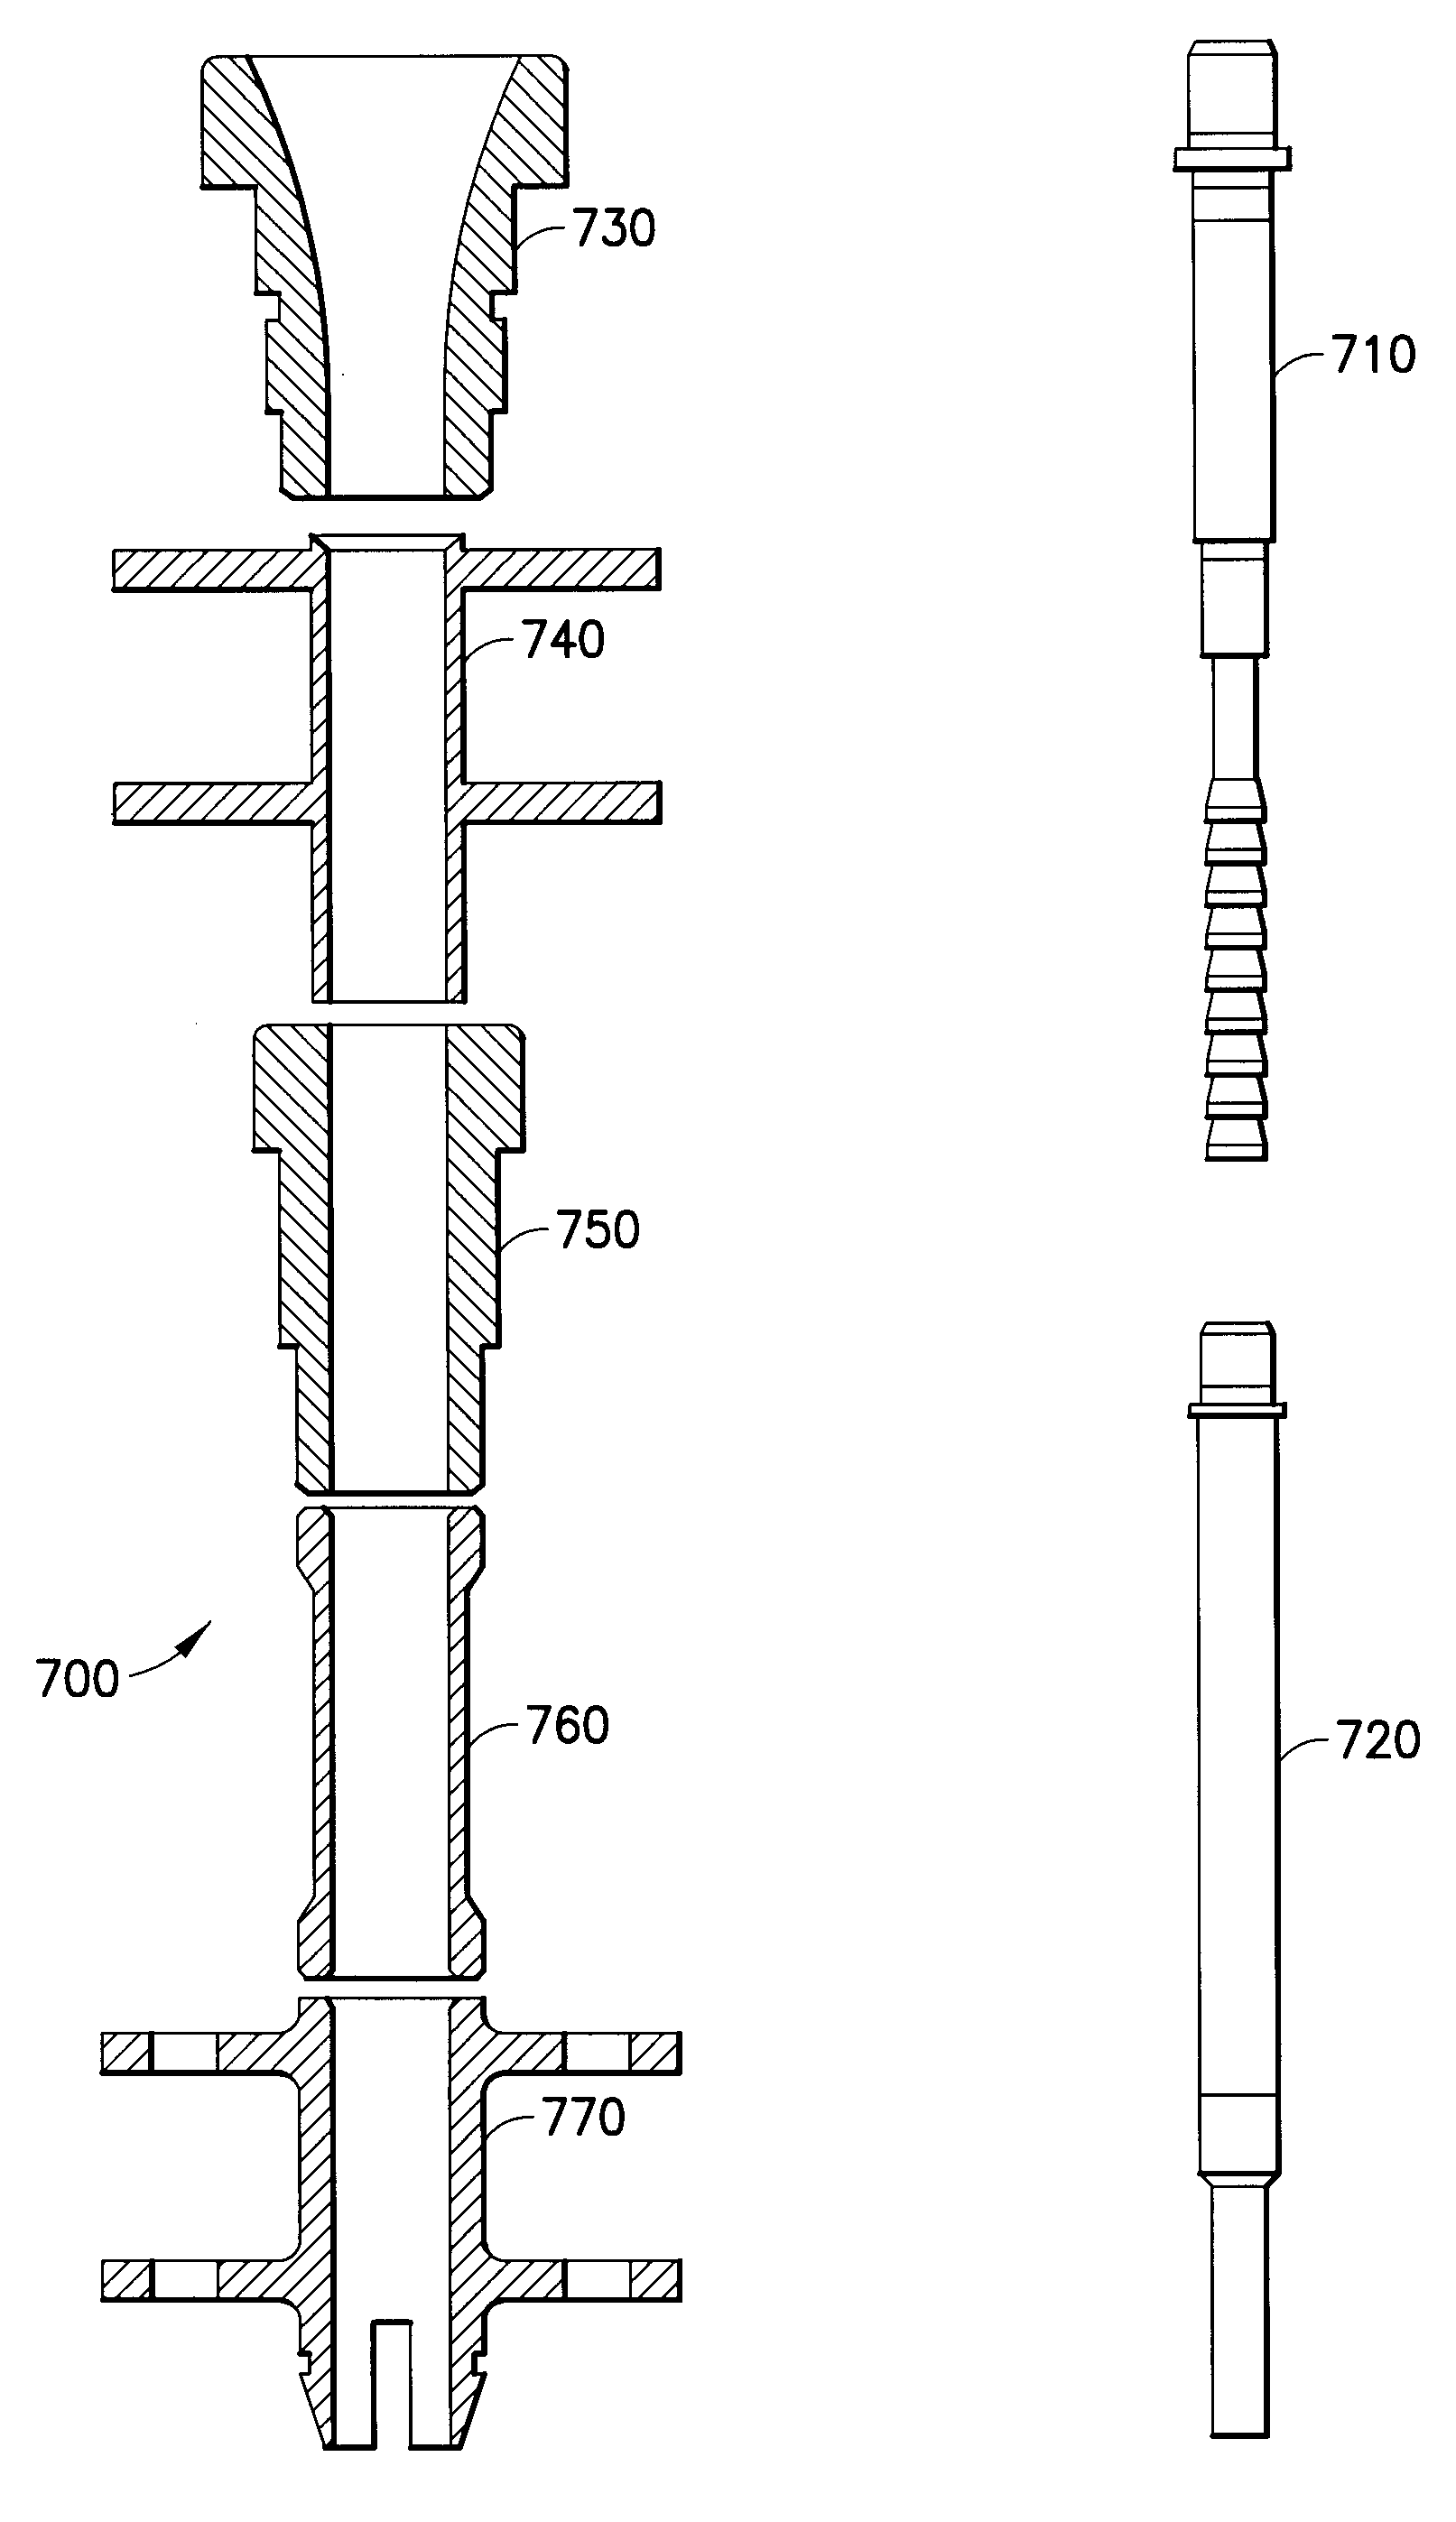 Tampon including crosslinked cellulose fibers and improved synthesis processes for producing same